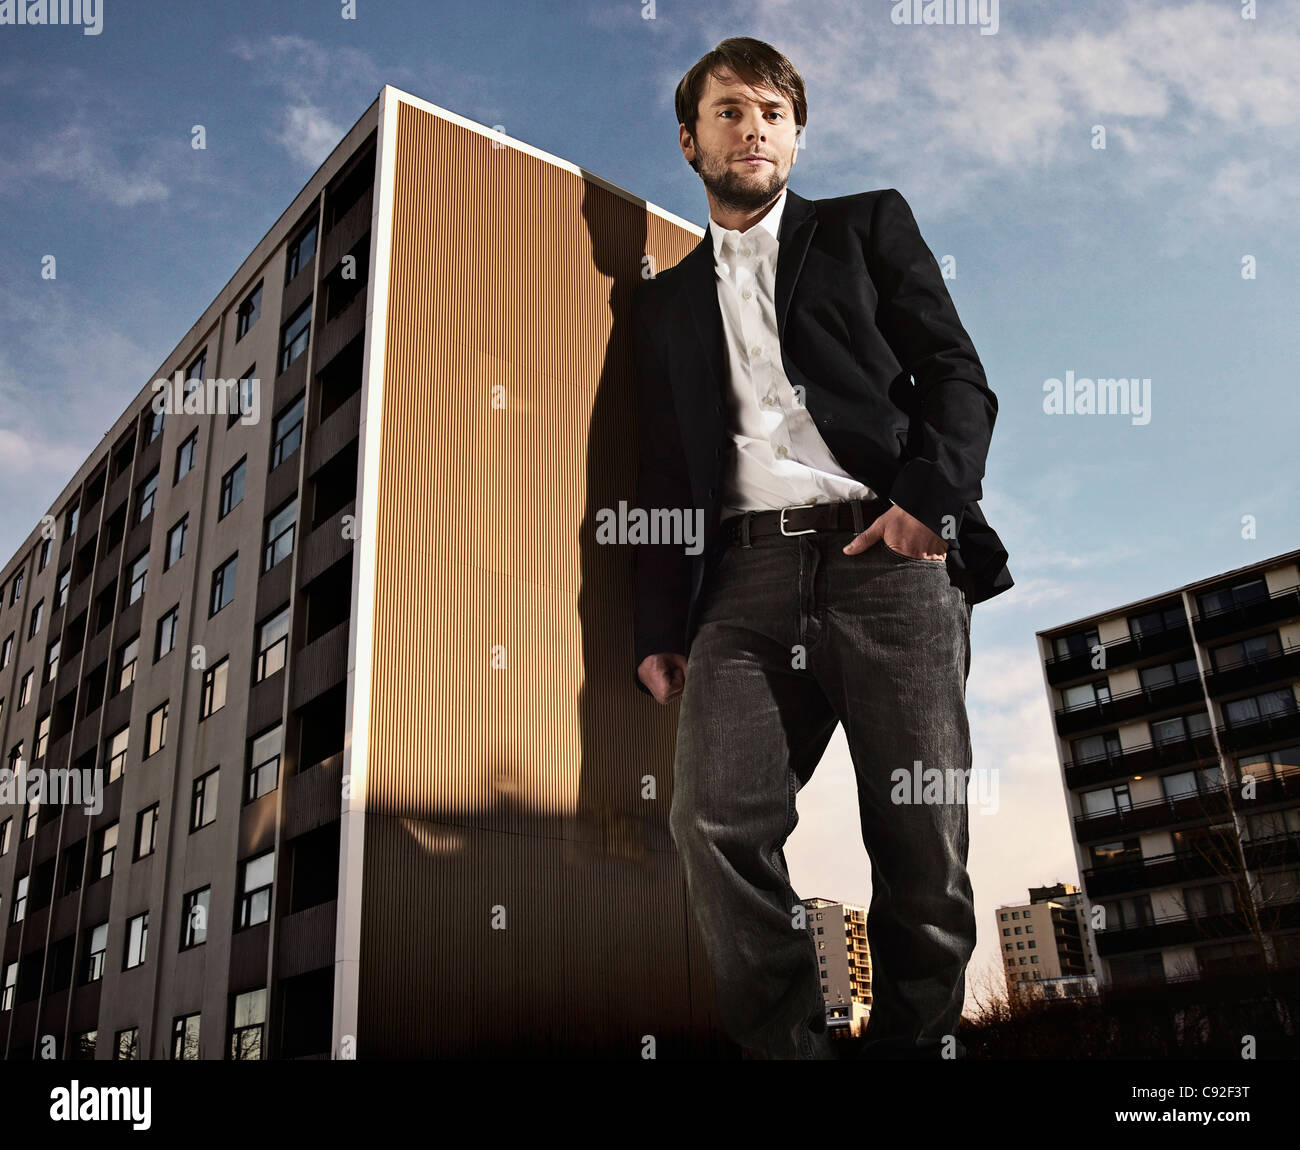 Oversized man leaning on building Stock Photo